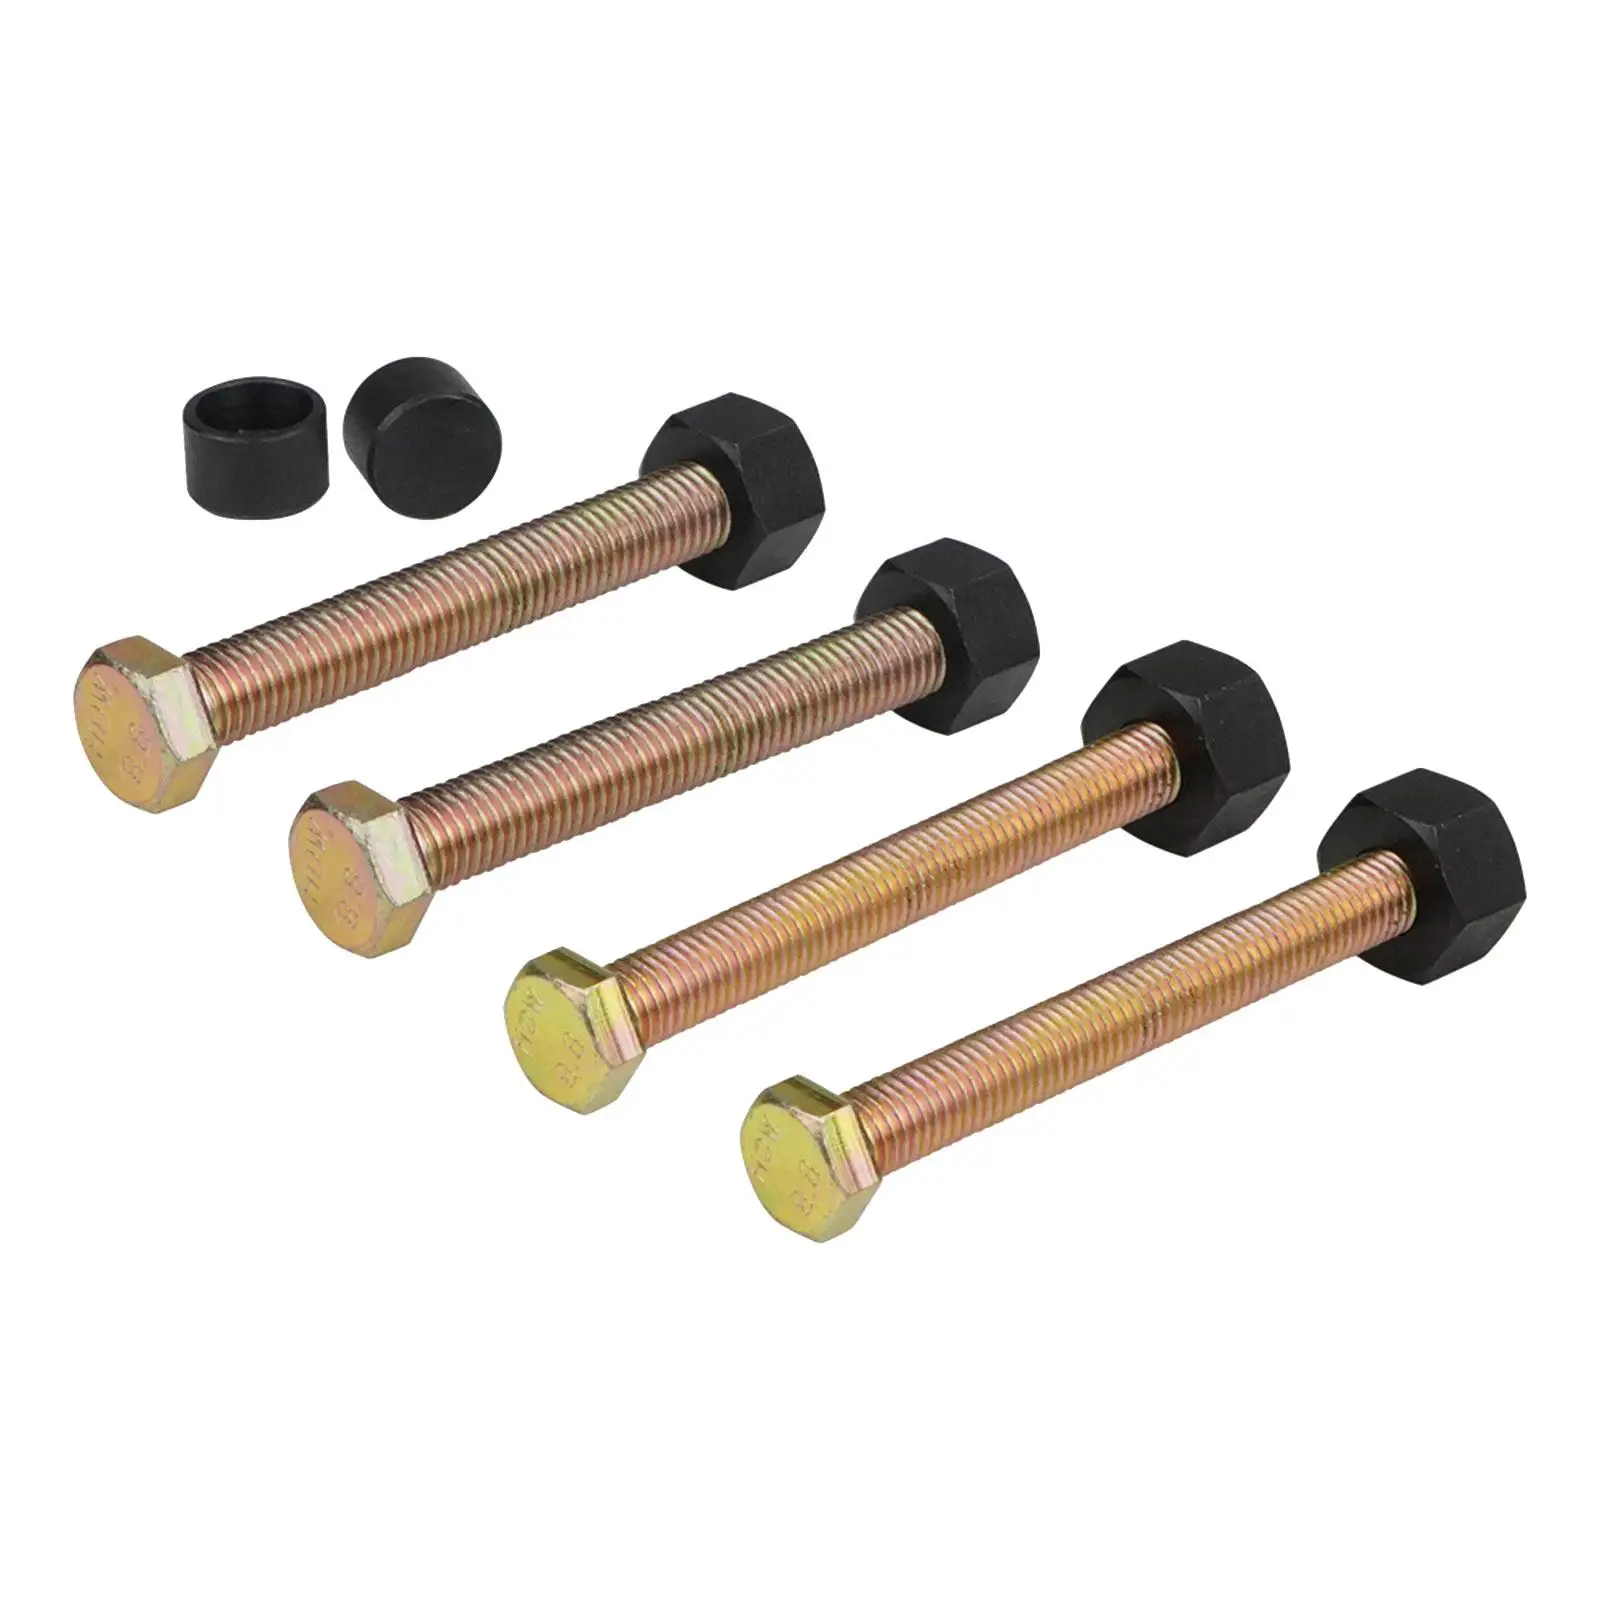 Impact Rated Hub Removal Bolt Set 78834 Accessories Metal Spare Parts Replacement Easy to Install Professional Pneumatic Tools